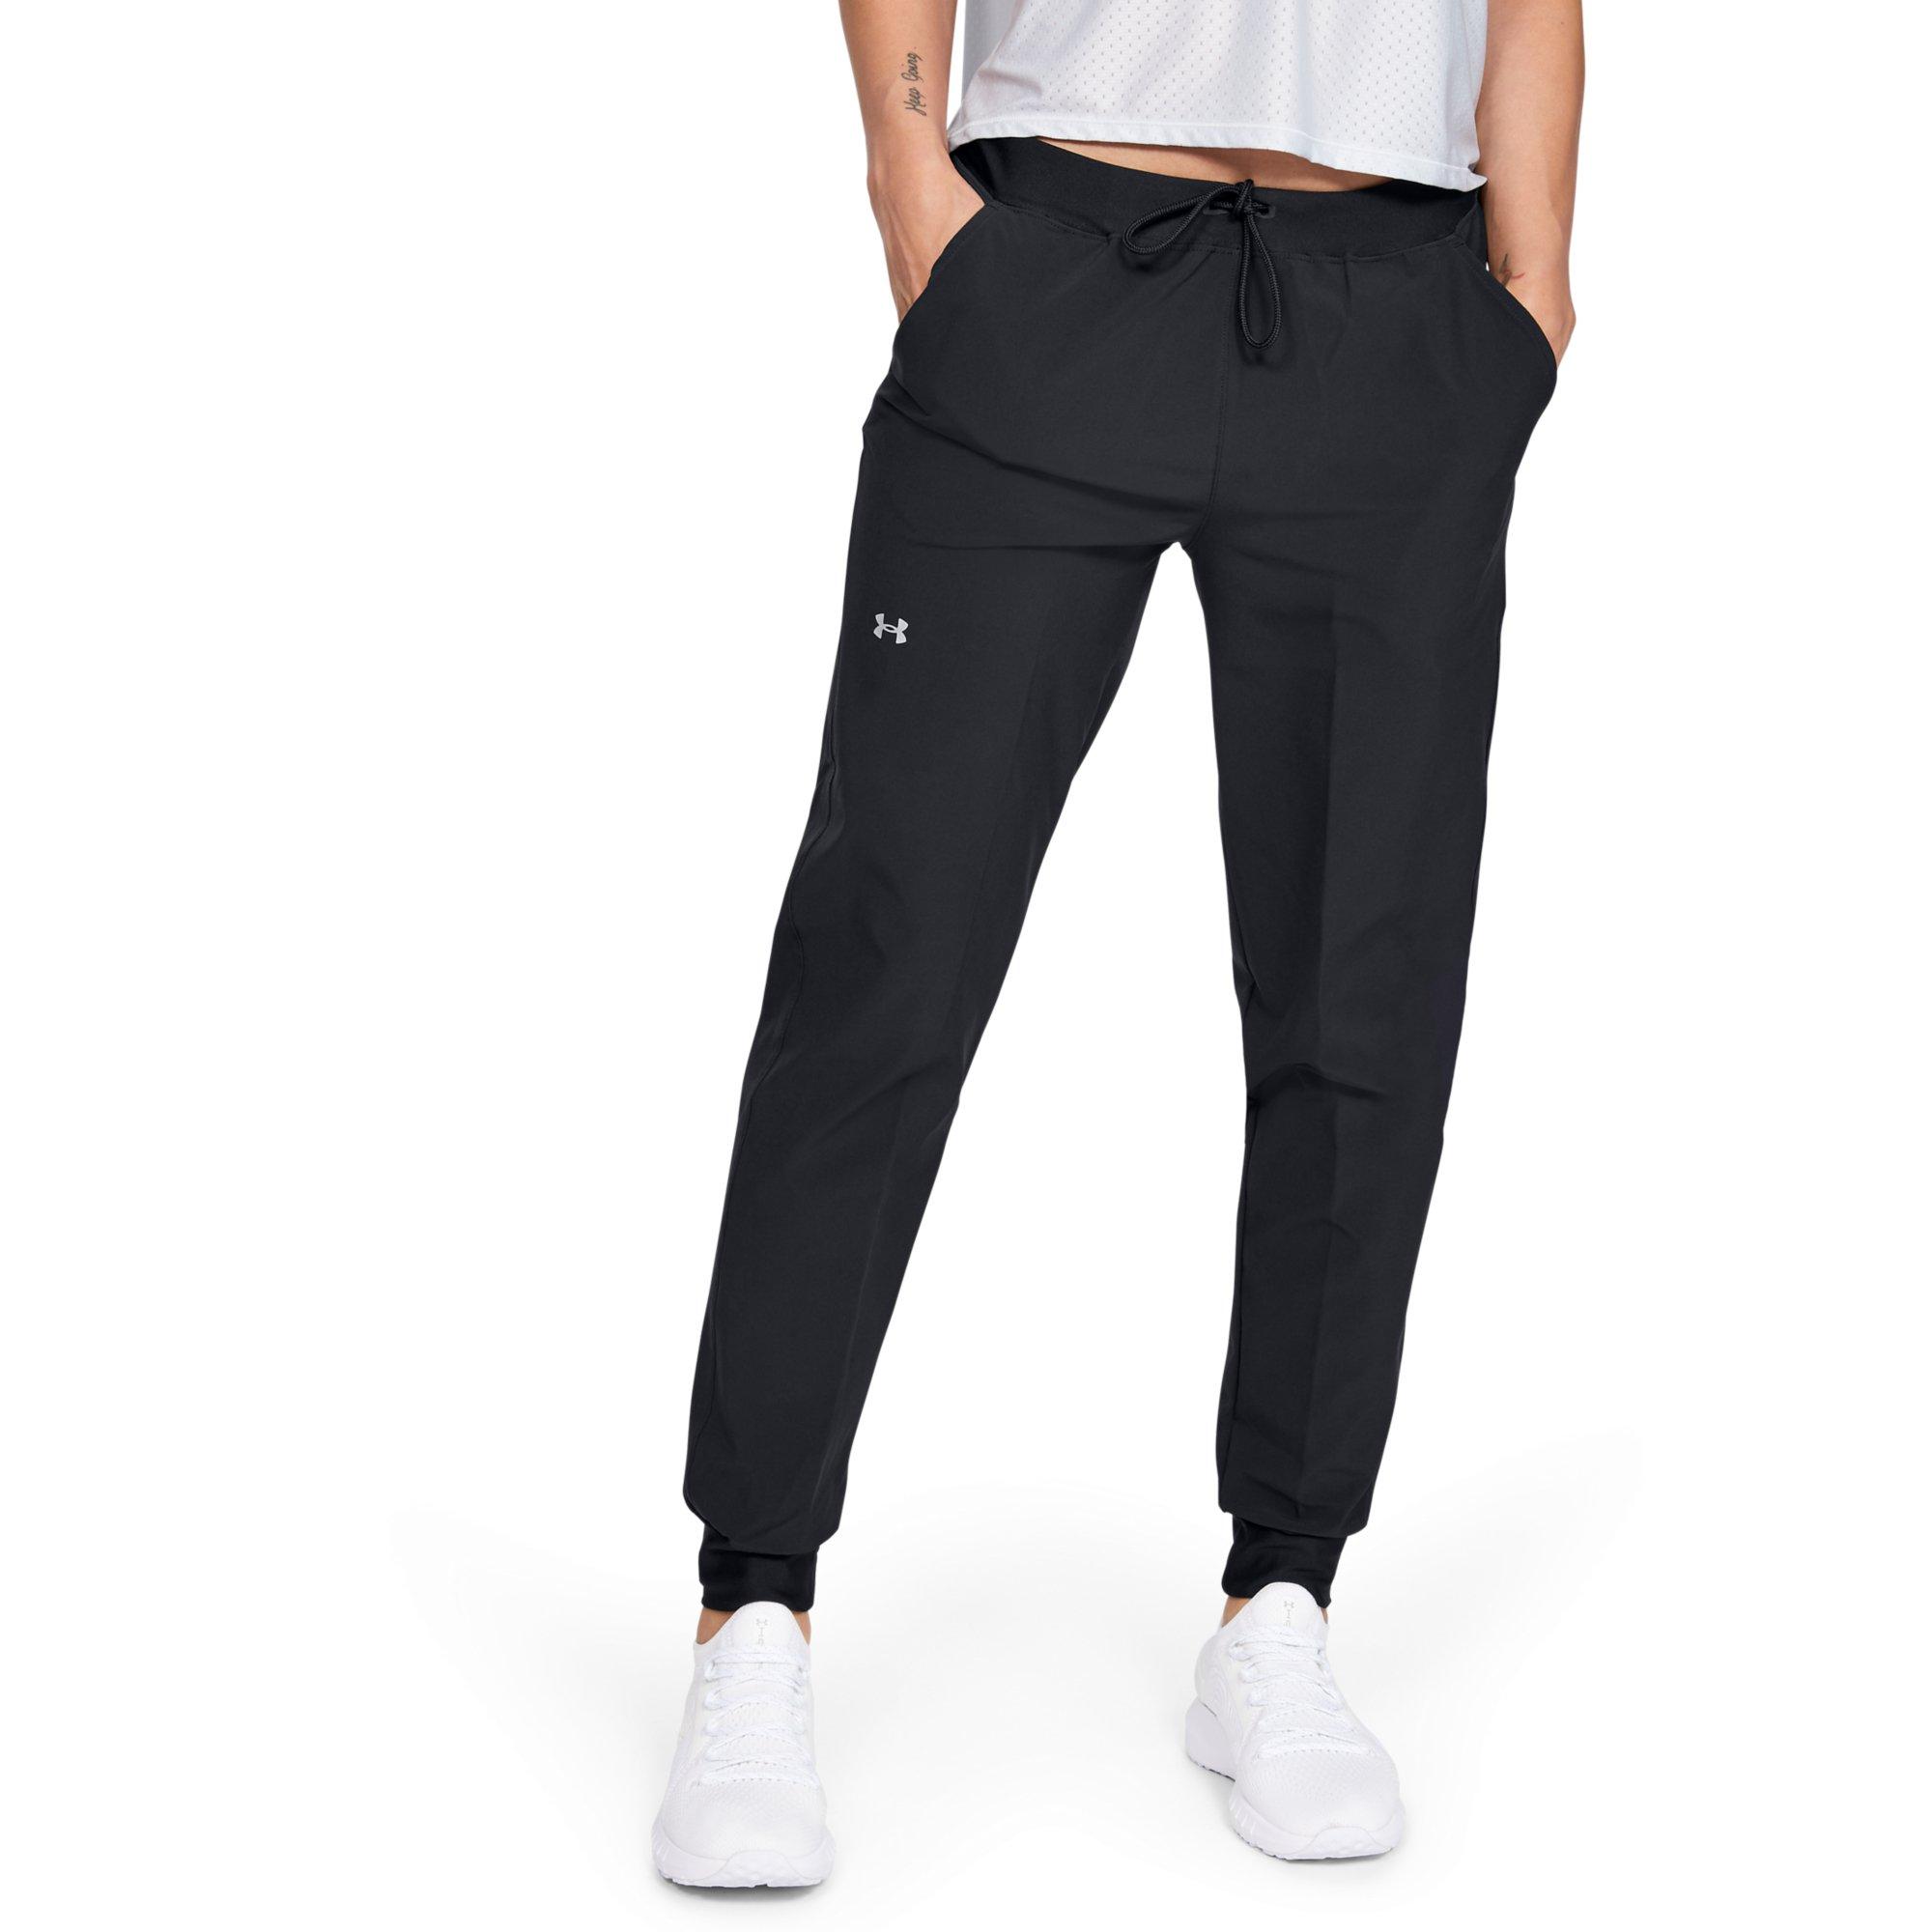 Under Armour Woven Pant RUSH Sport Pants Fitness Black SIZE Small  1369846-001